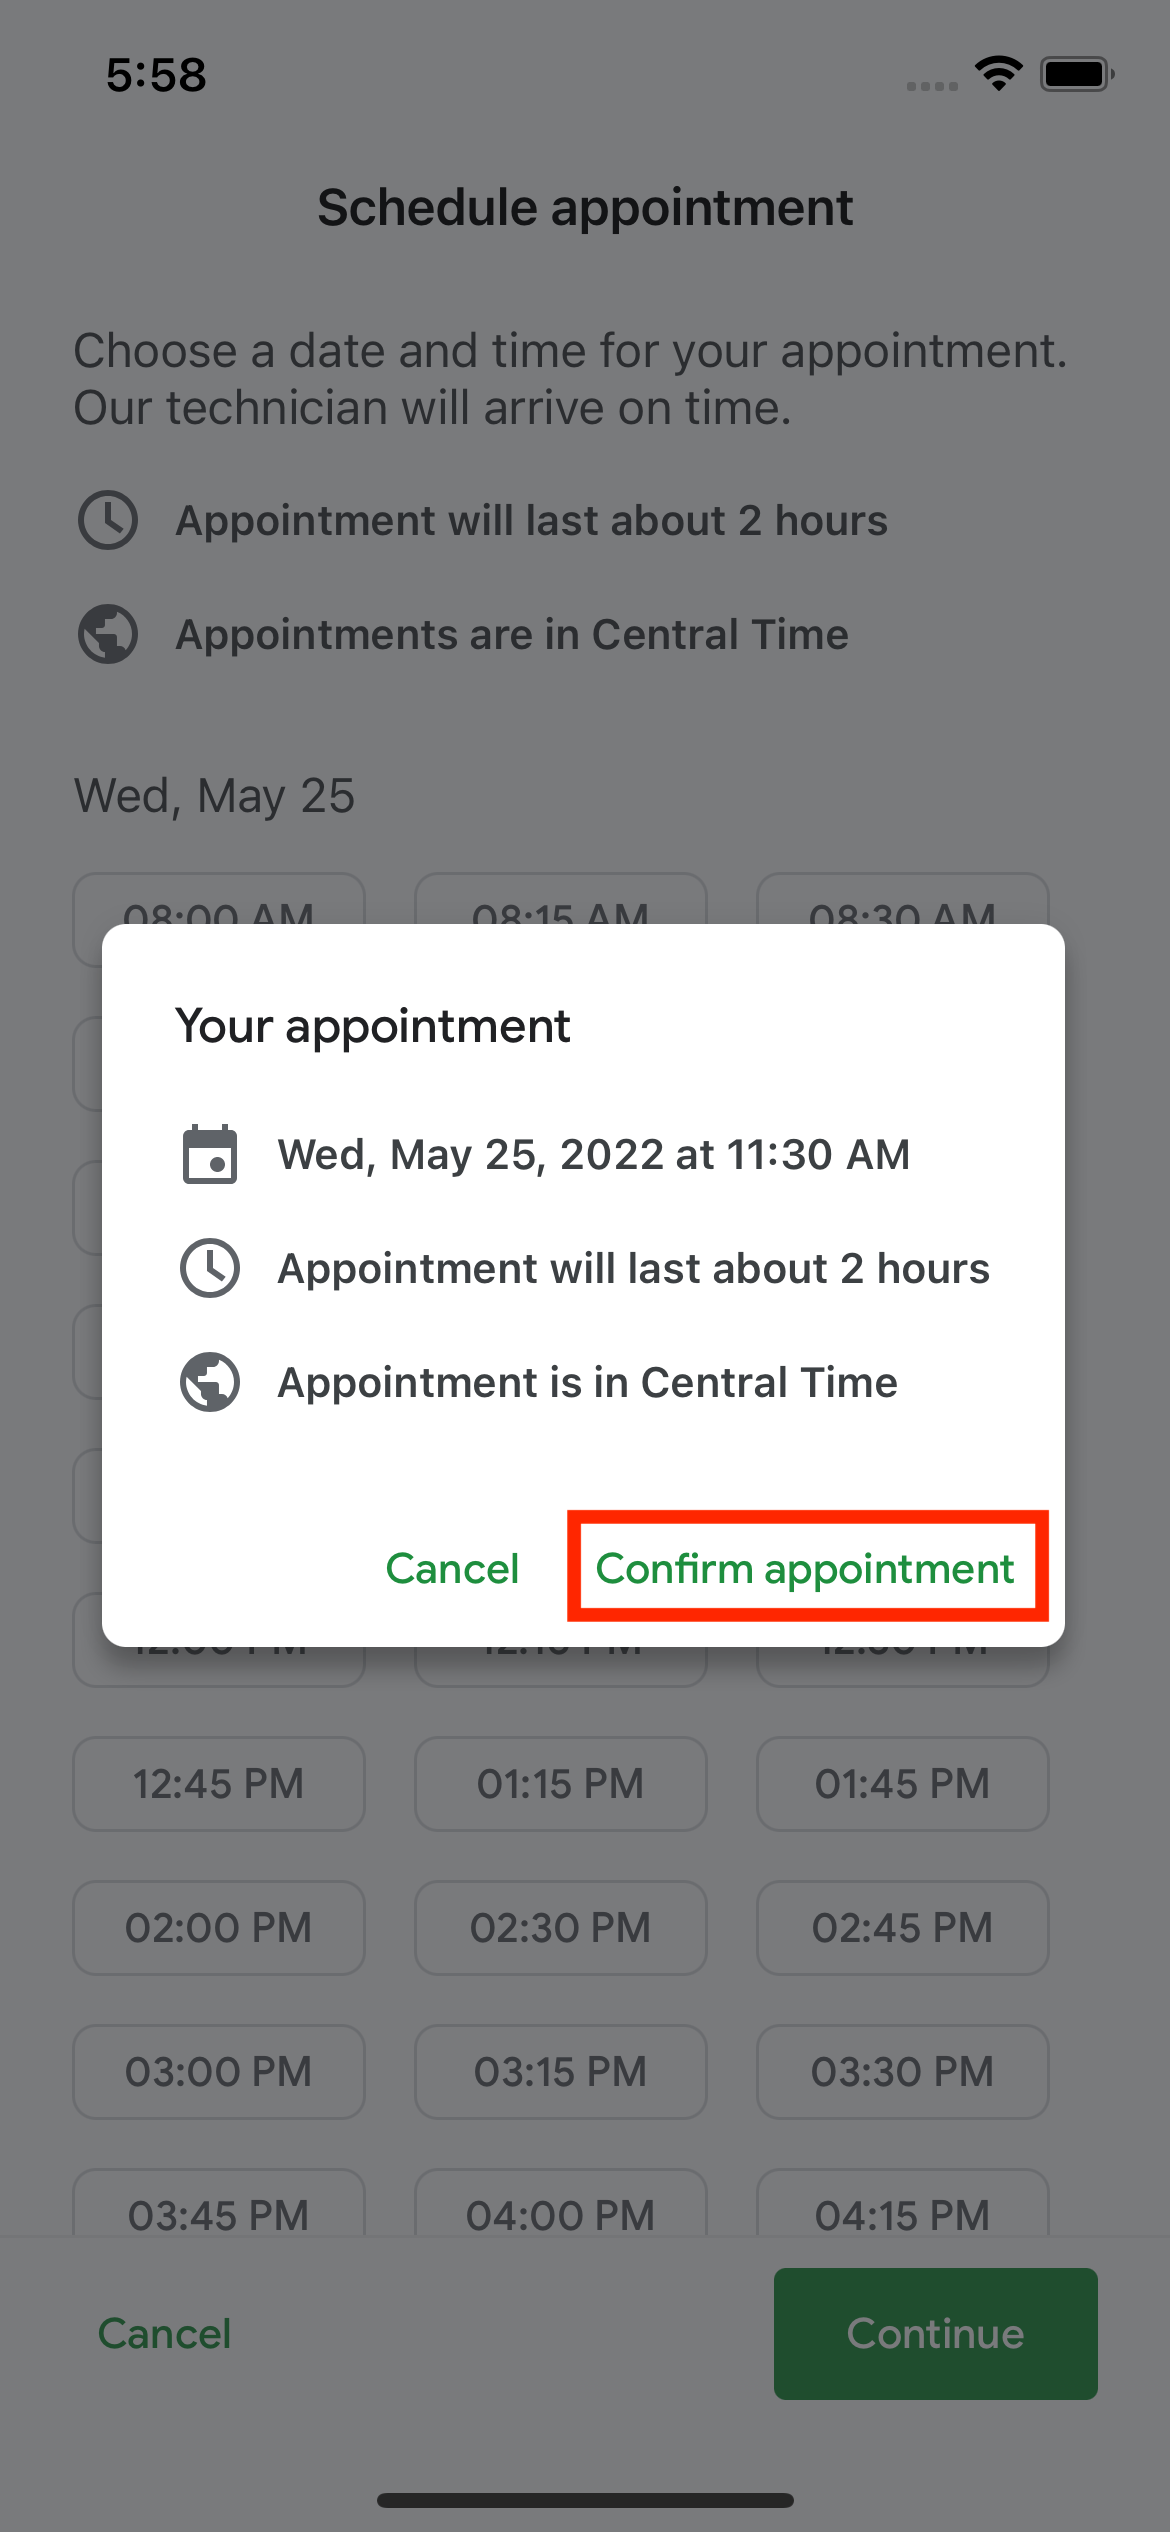 Confirm new appointment in the Fiber App